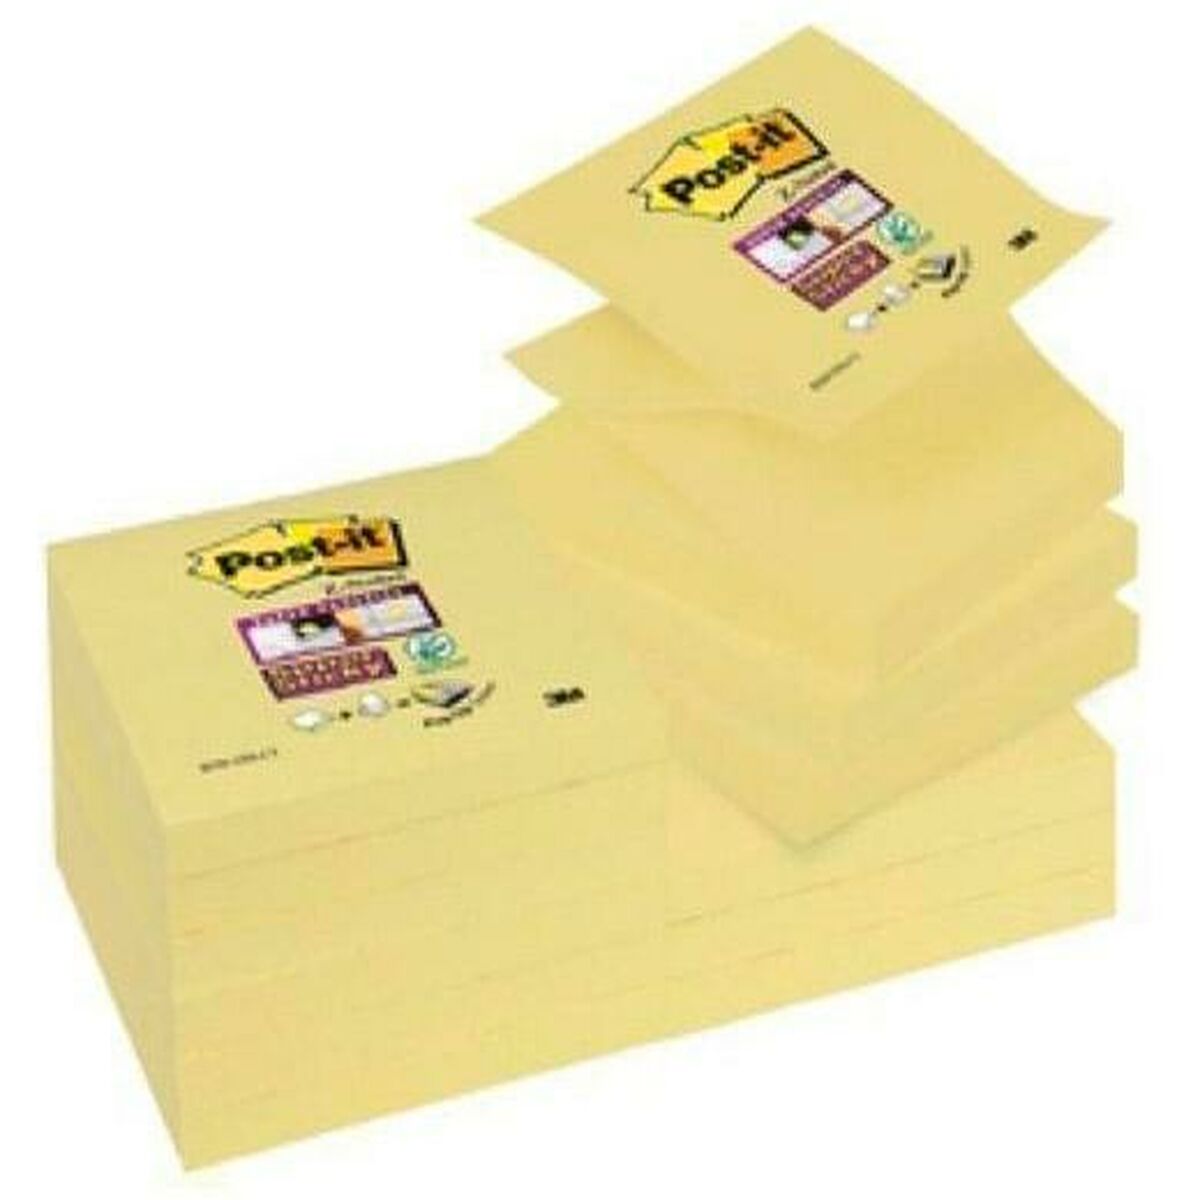 Note Adesive Post-it CANARY YELLOW Giallo 7,6 x 7,6 cm 12 Pezzi 76 x 76 mm